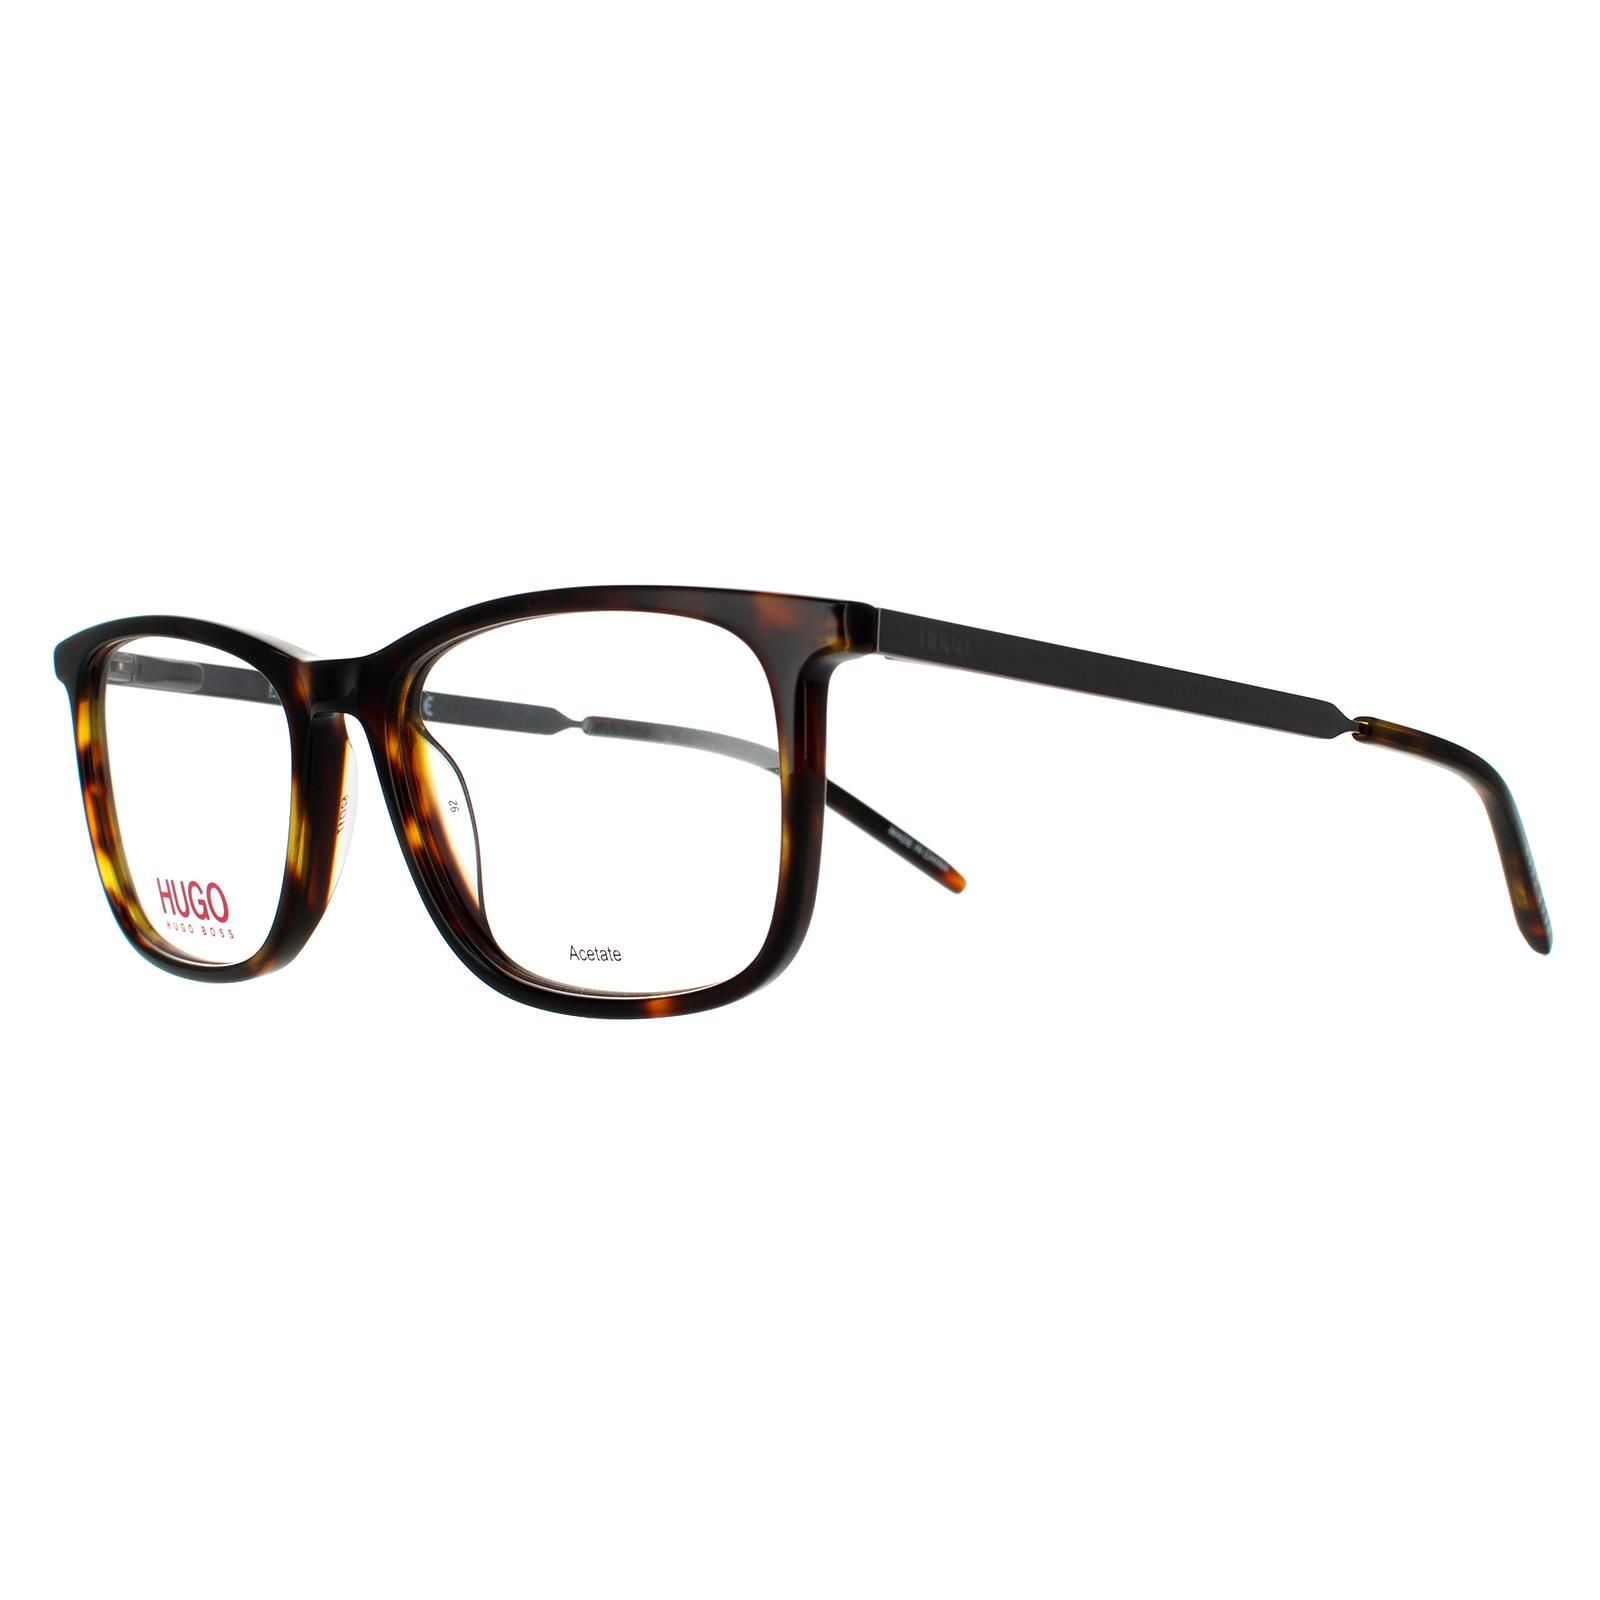 Hugo by Hugo Boss Square Mens Havana Glasses Frames HG 1018 are a simple square style crafted from lightweight acetate. Slim temples are engraved with the Hugo Boss logo for authenticity.